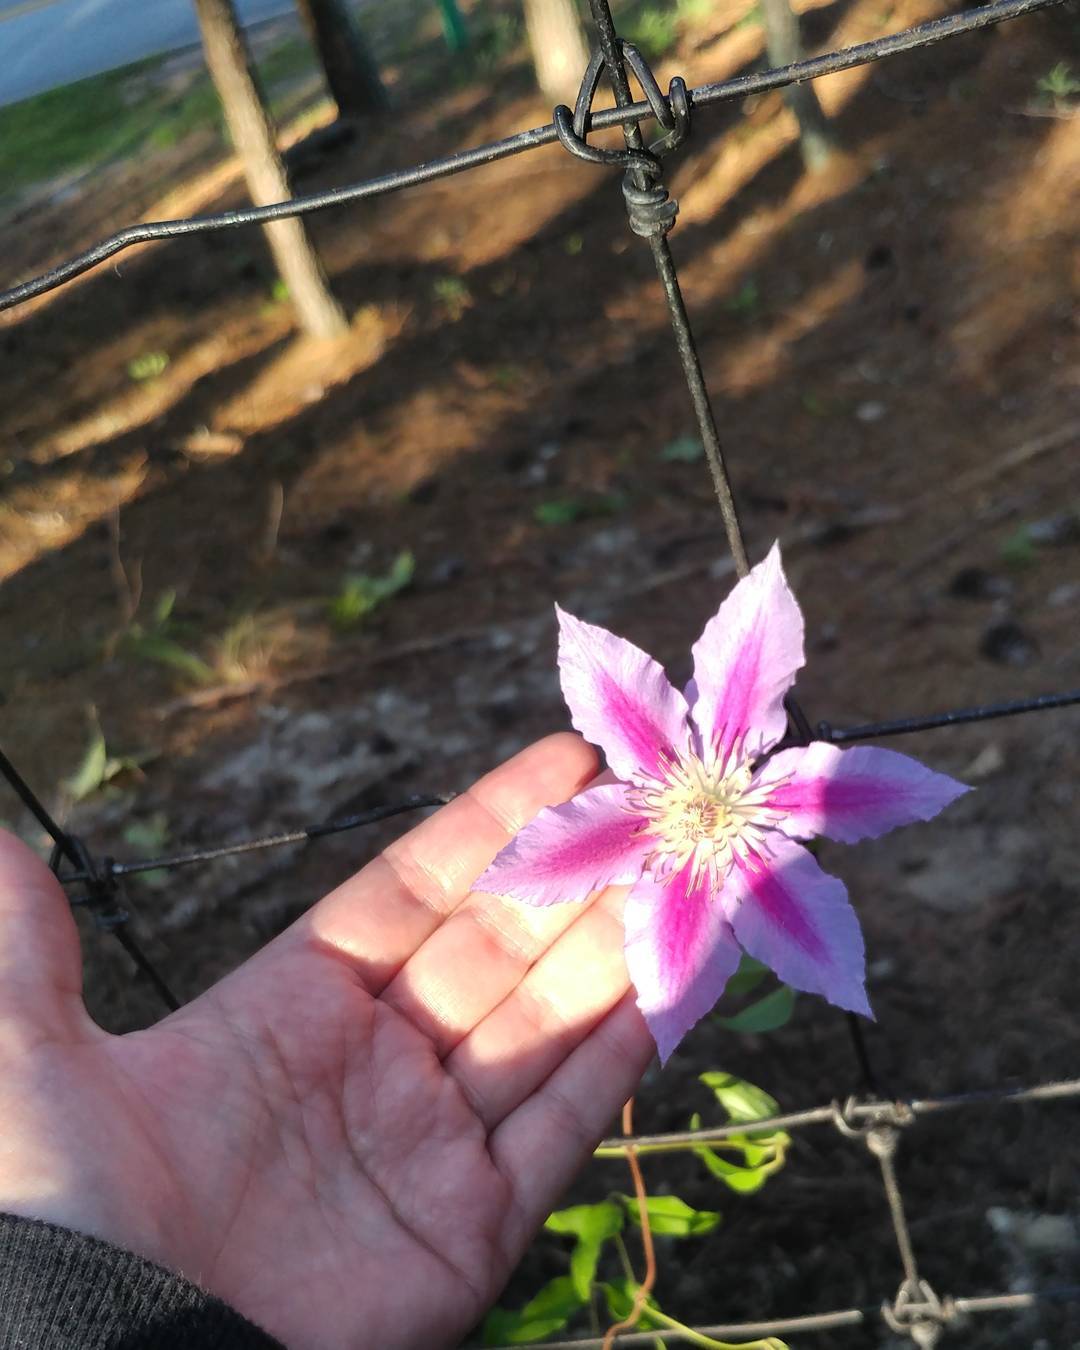 New fence flower. I hope it is edible. I am sure the deer are going to be hungry if the fence keeps them out of the garden!